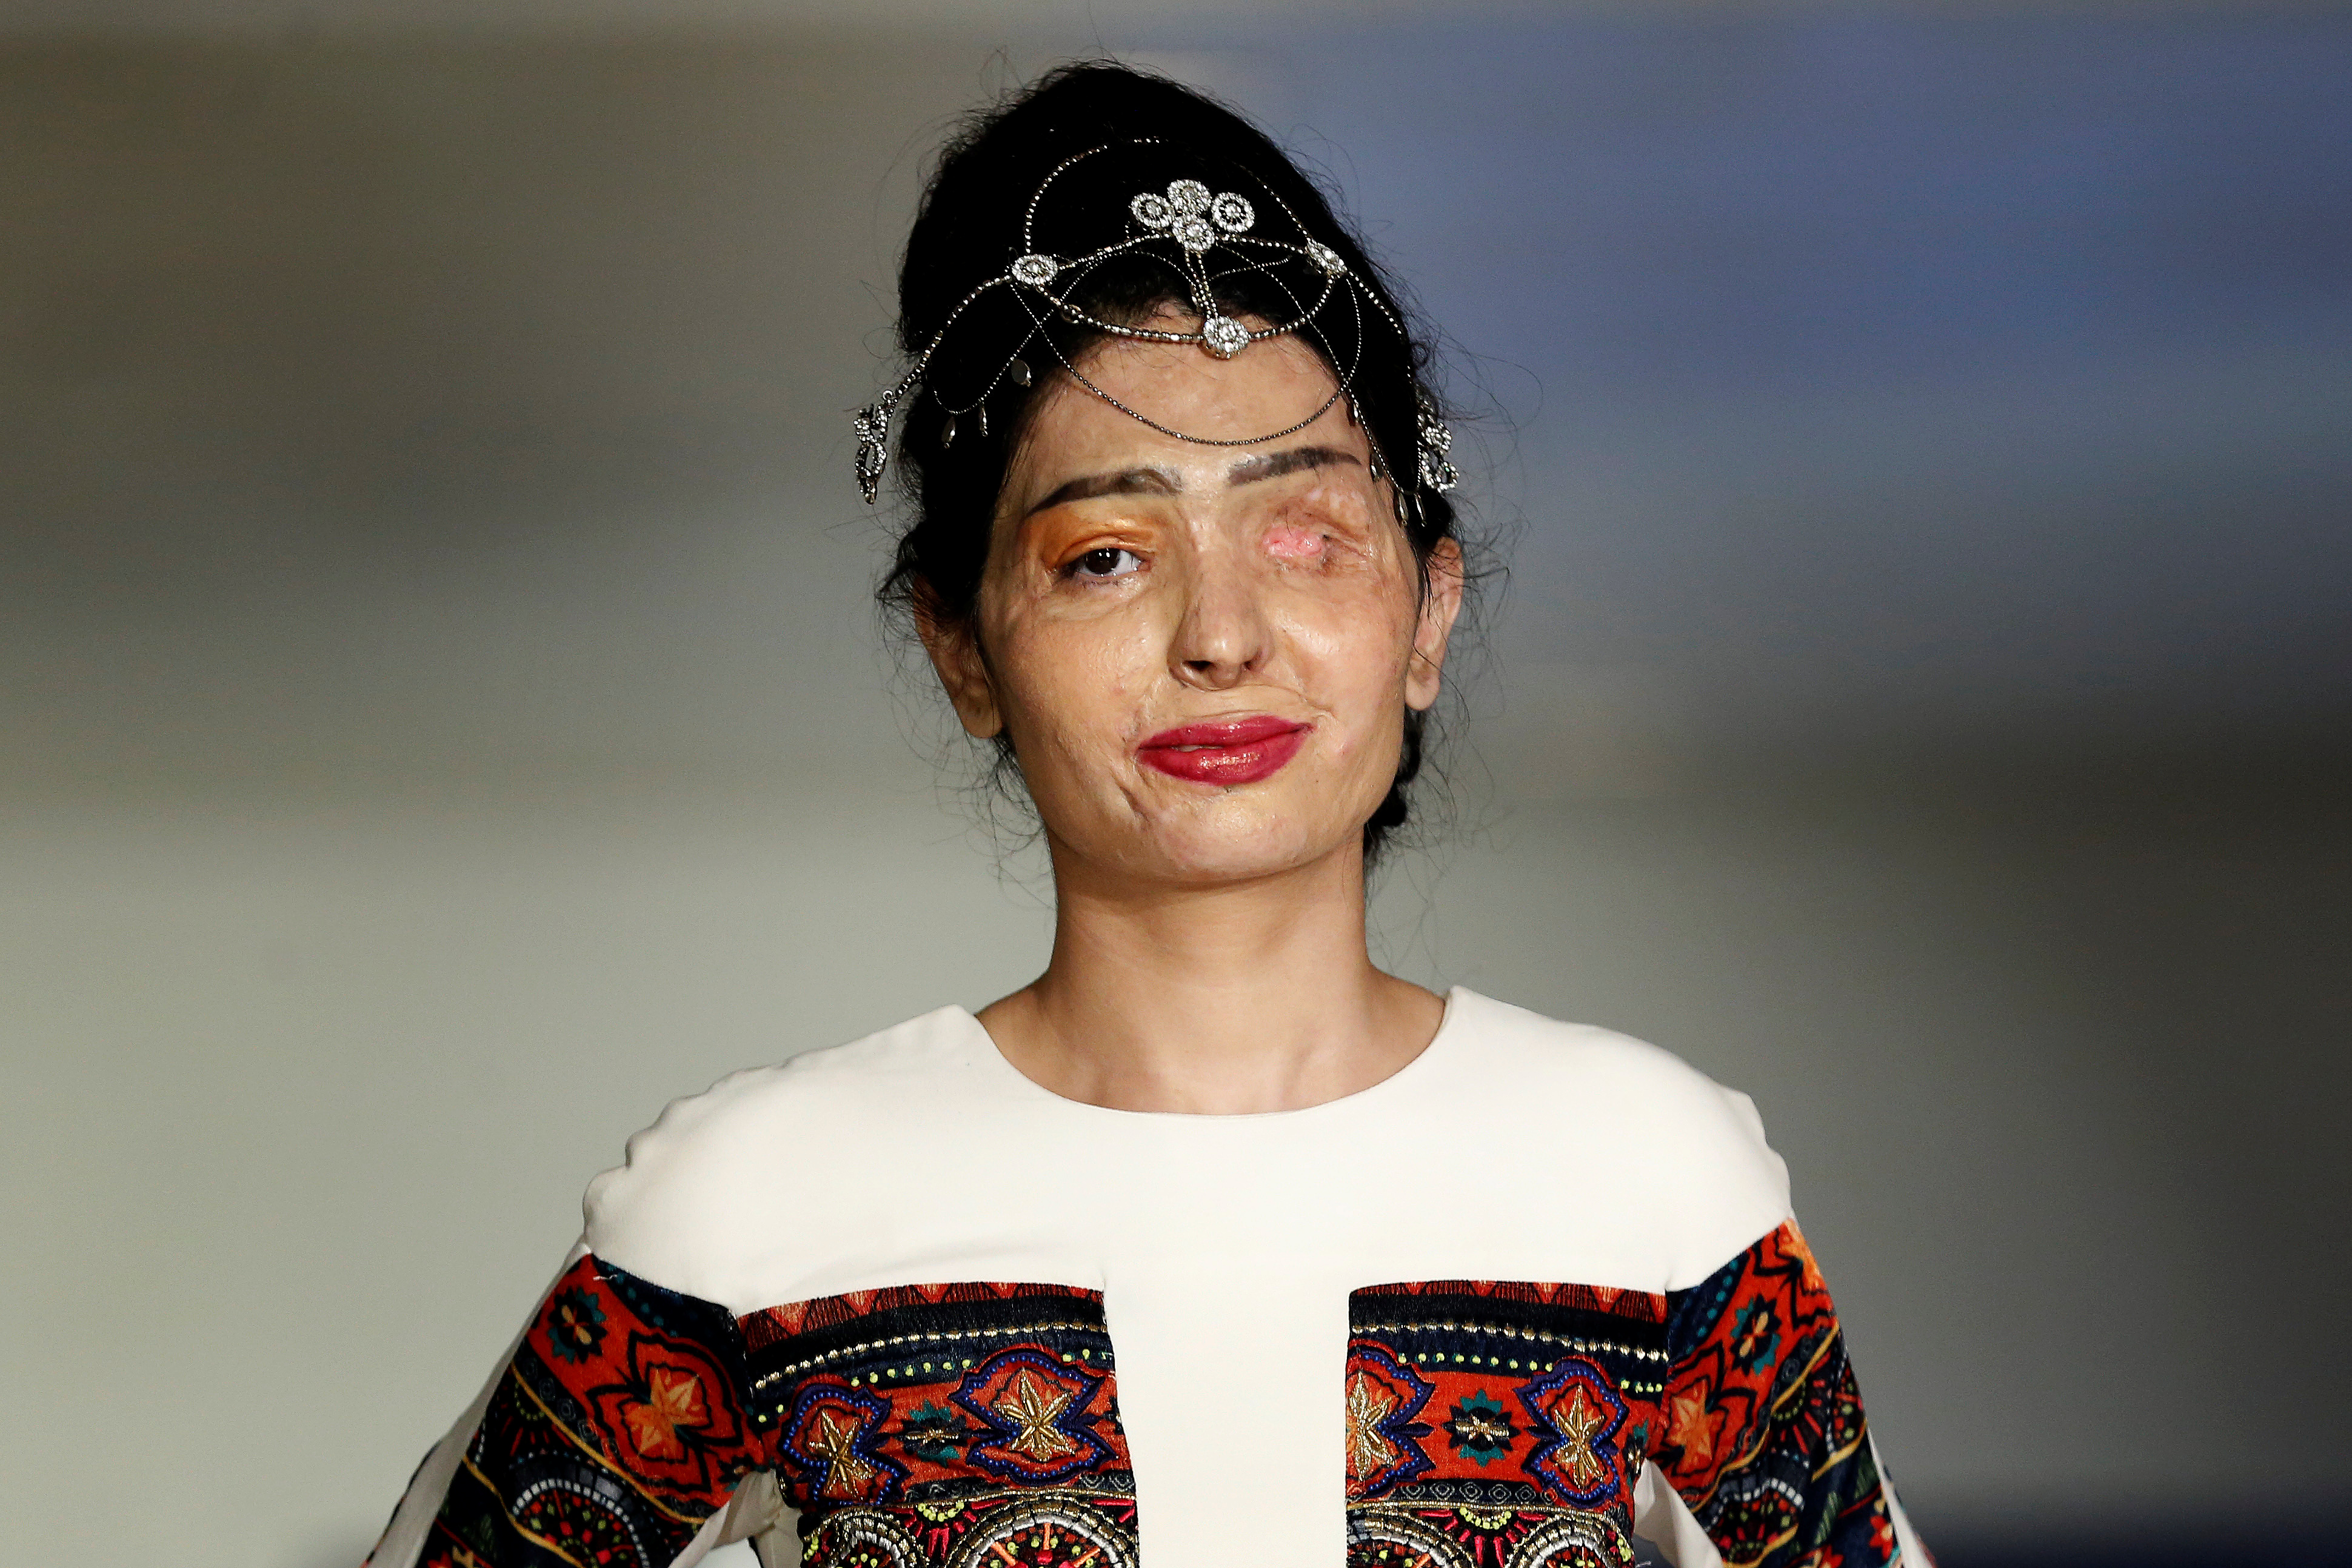 Indian model and acid attack survivor Reshma Quereshi presents a creation from Indian designer Archana Kochhar's Spring/Summer 2017 collection during New York Fashion Week in the Manhattan borough of New York, U.S., September 8, 2016.  REUTERS/Lucas Jackson